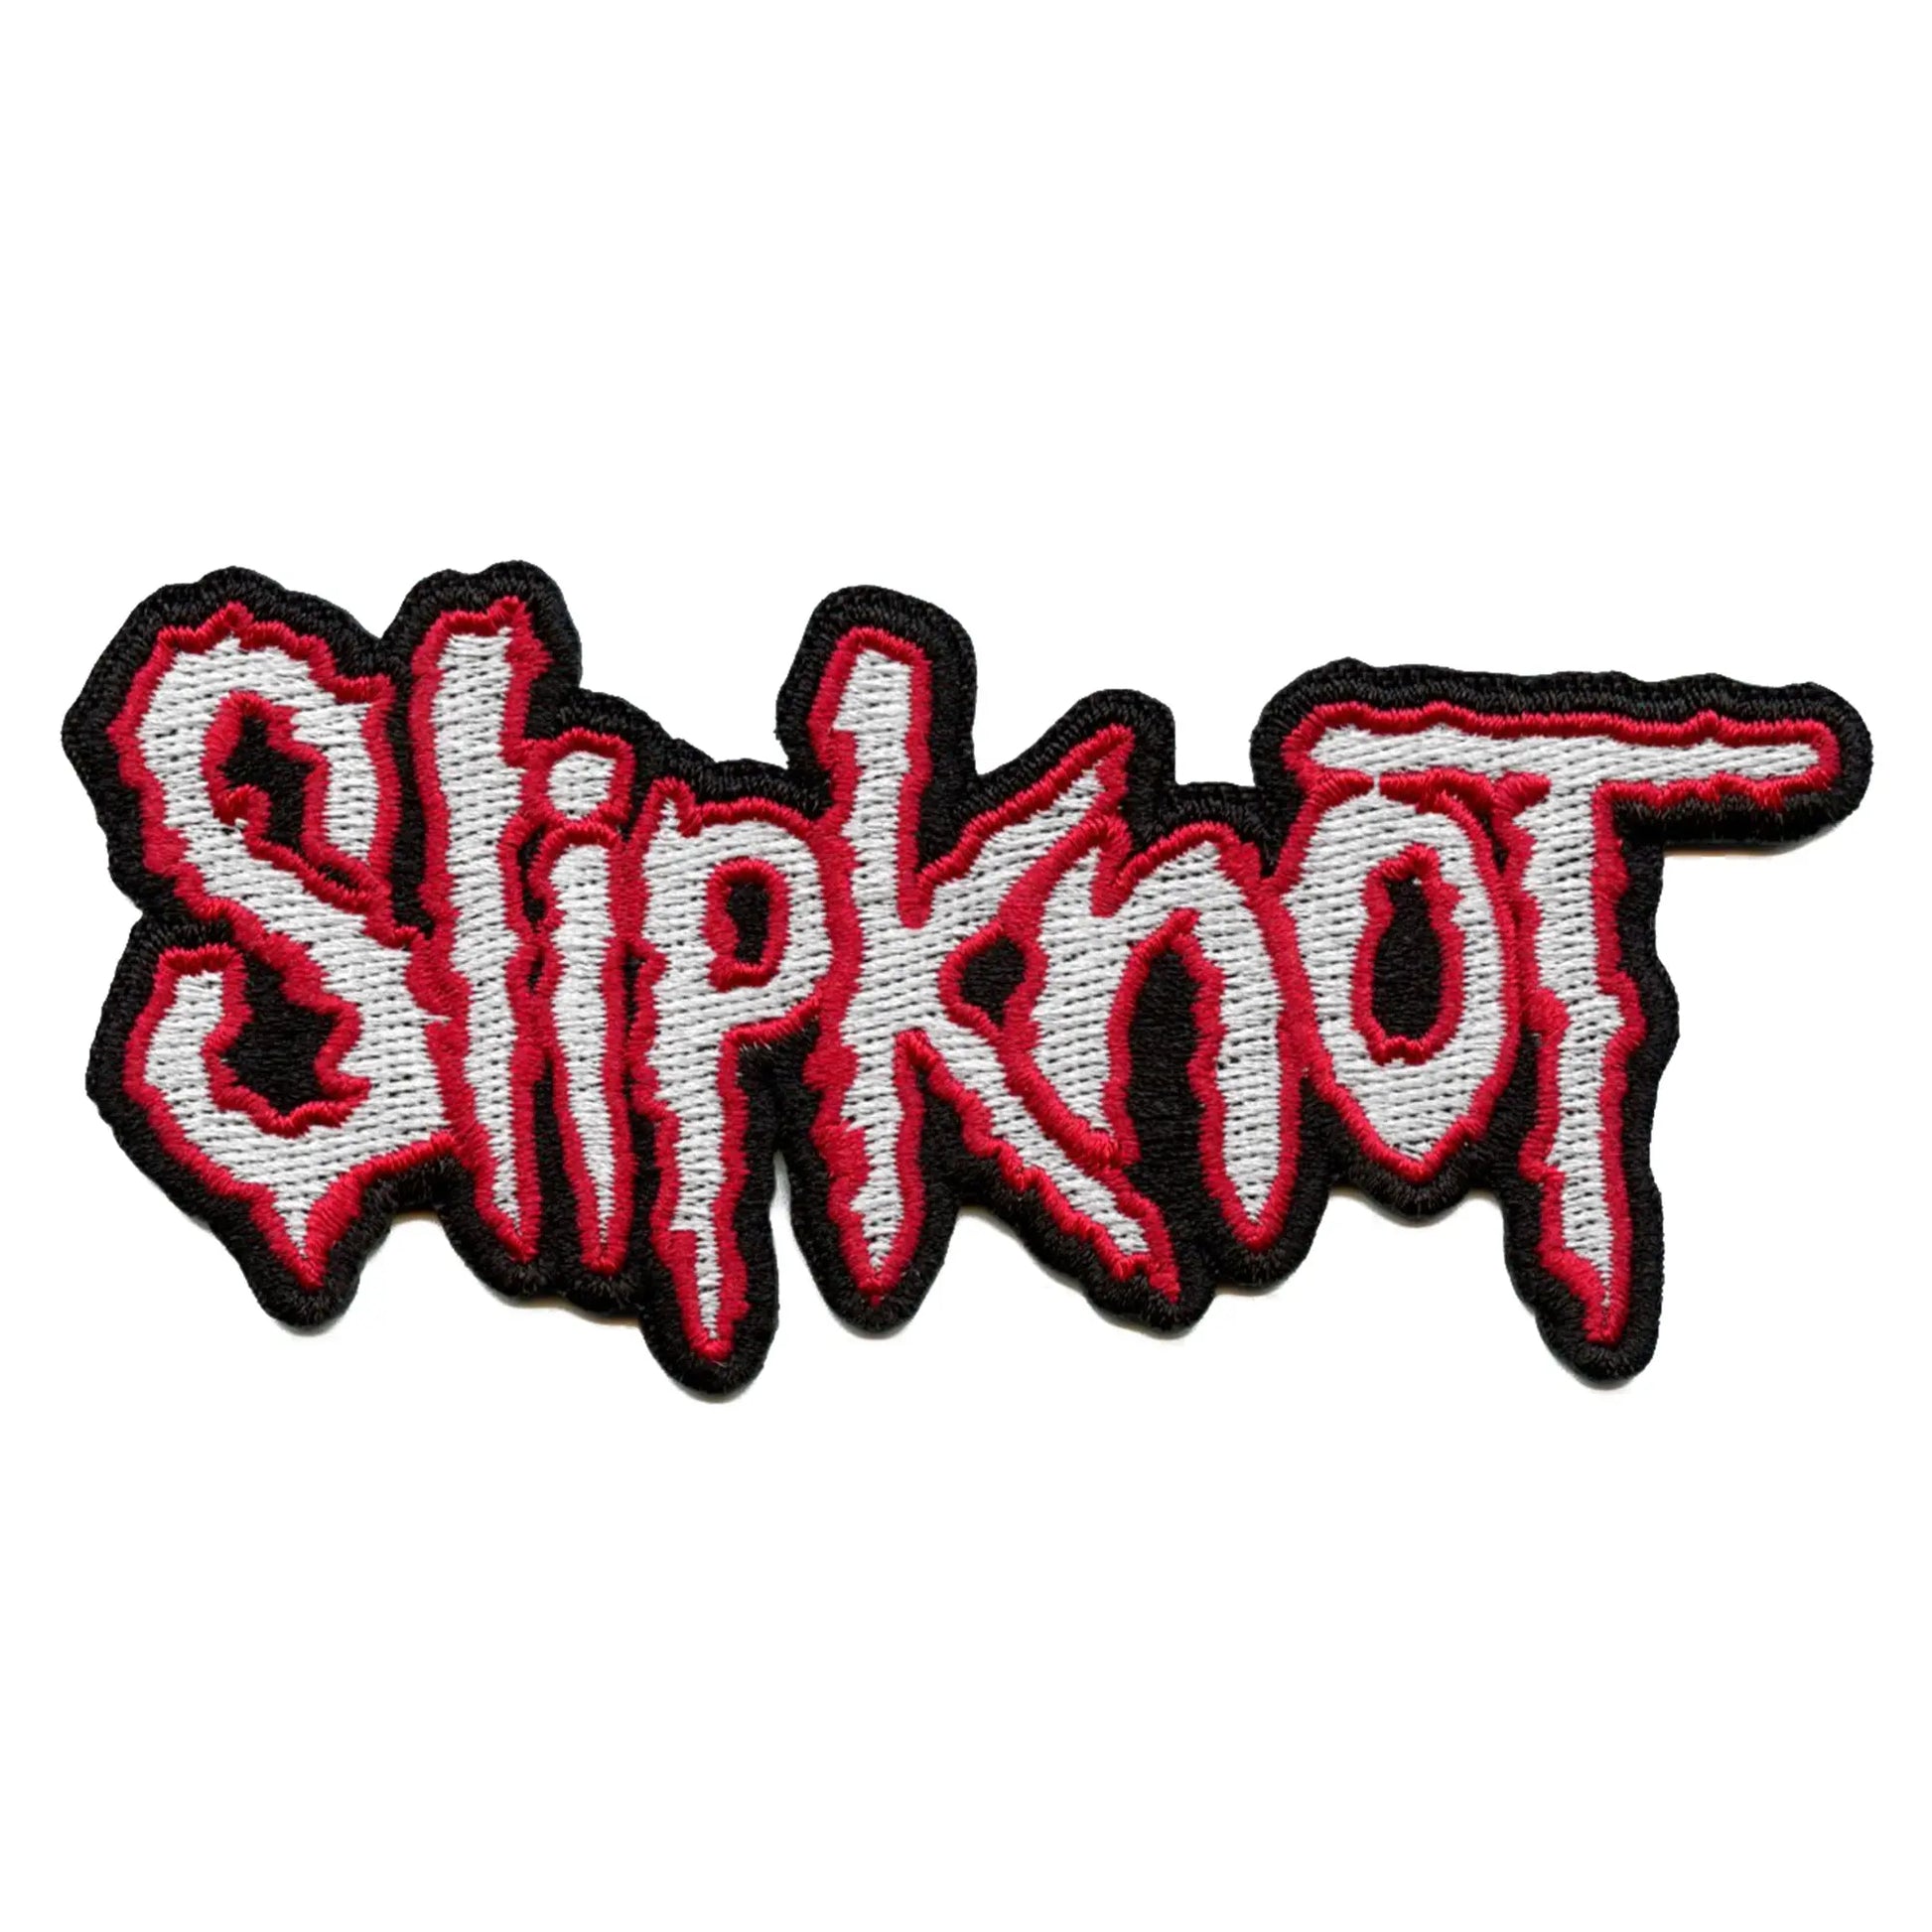 Slipknot Band Name RED Patch Mask American Metal Embroidered Iron On